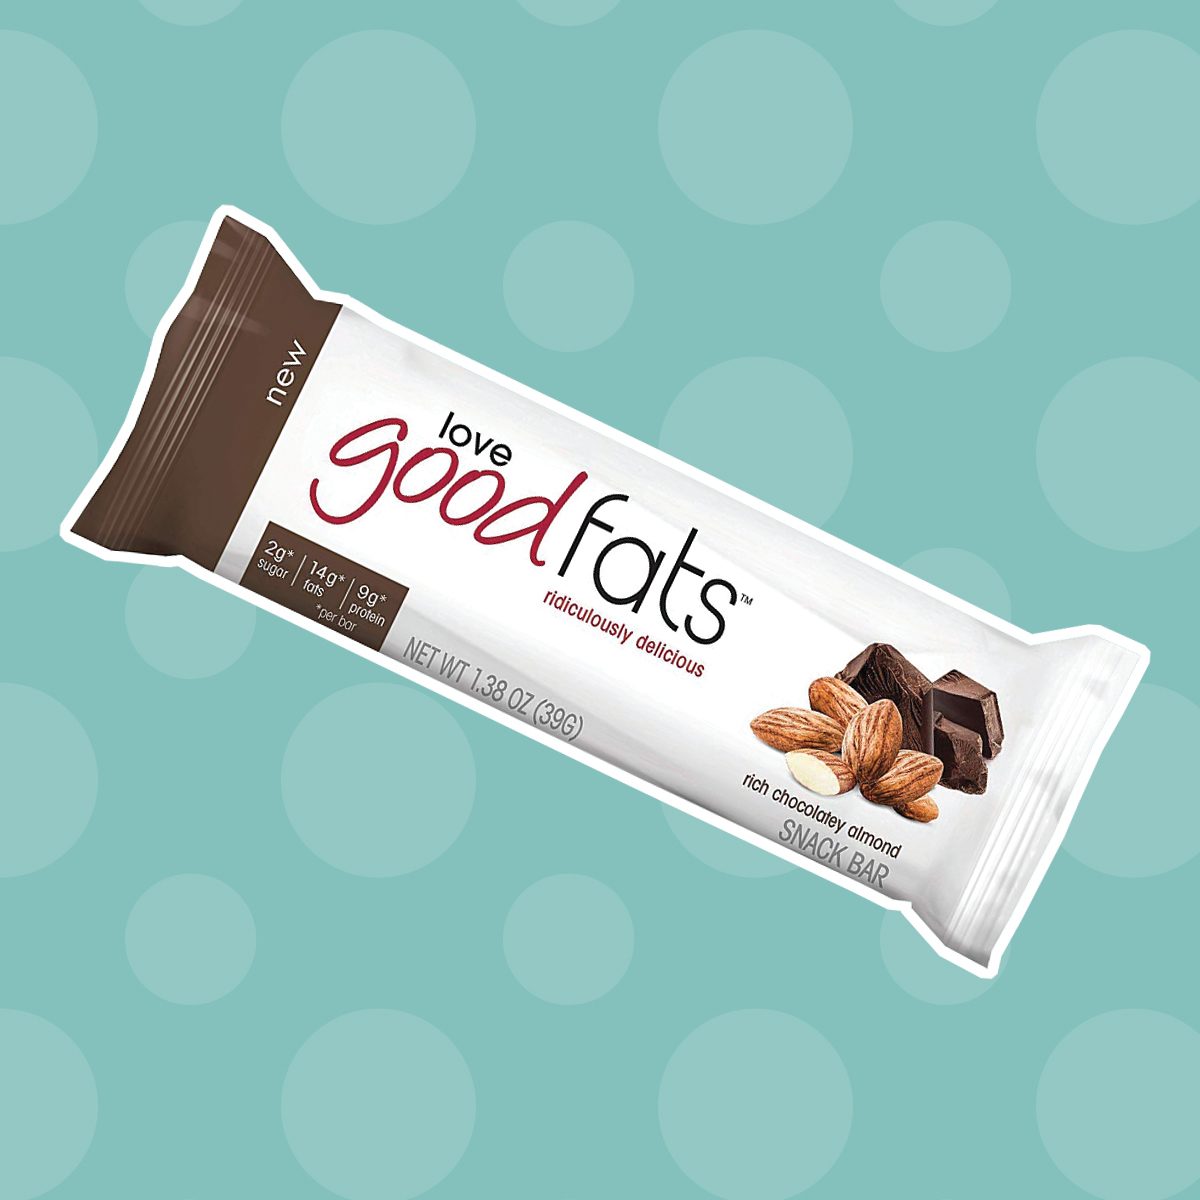 are good fats bars healthy